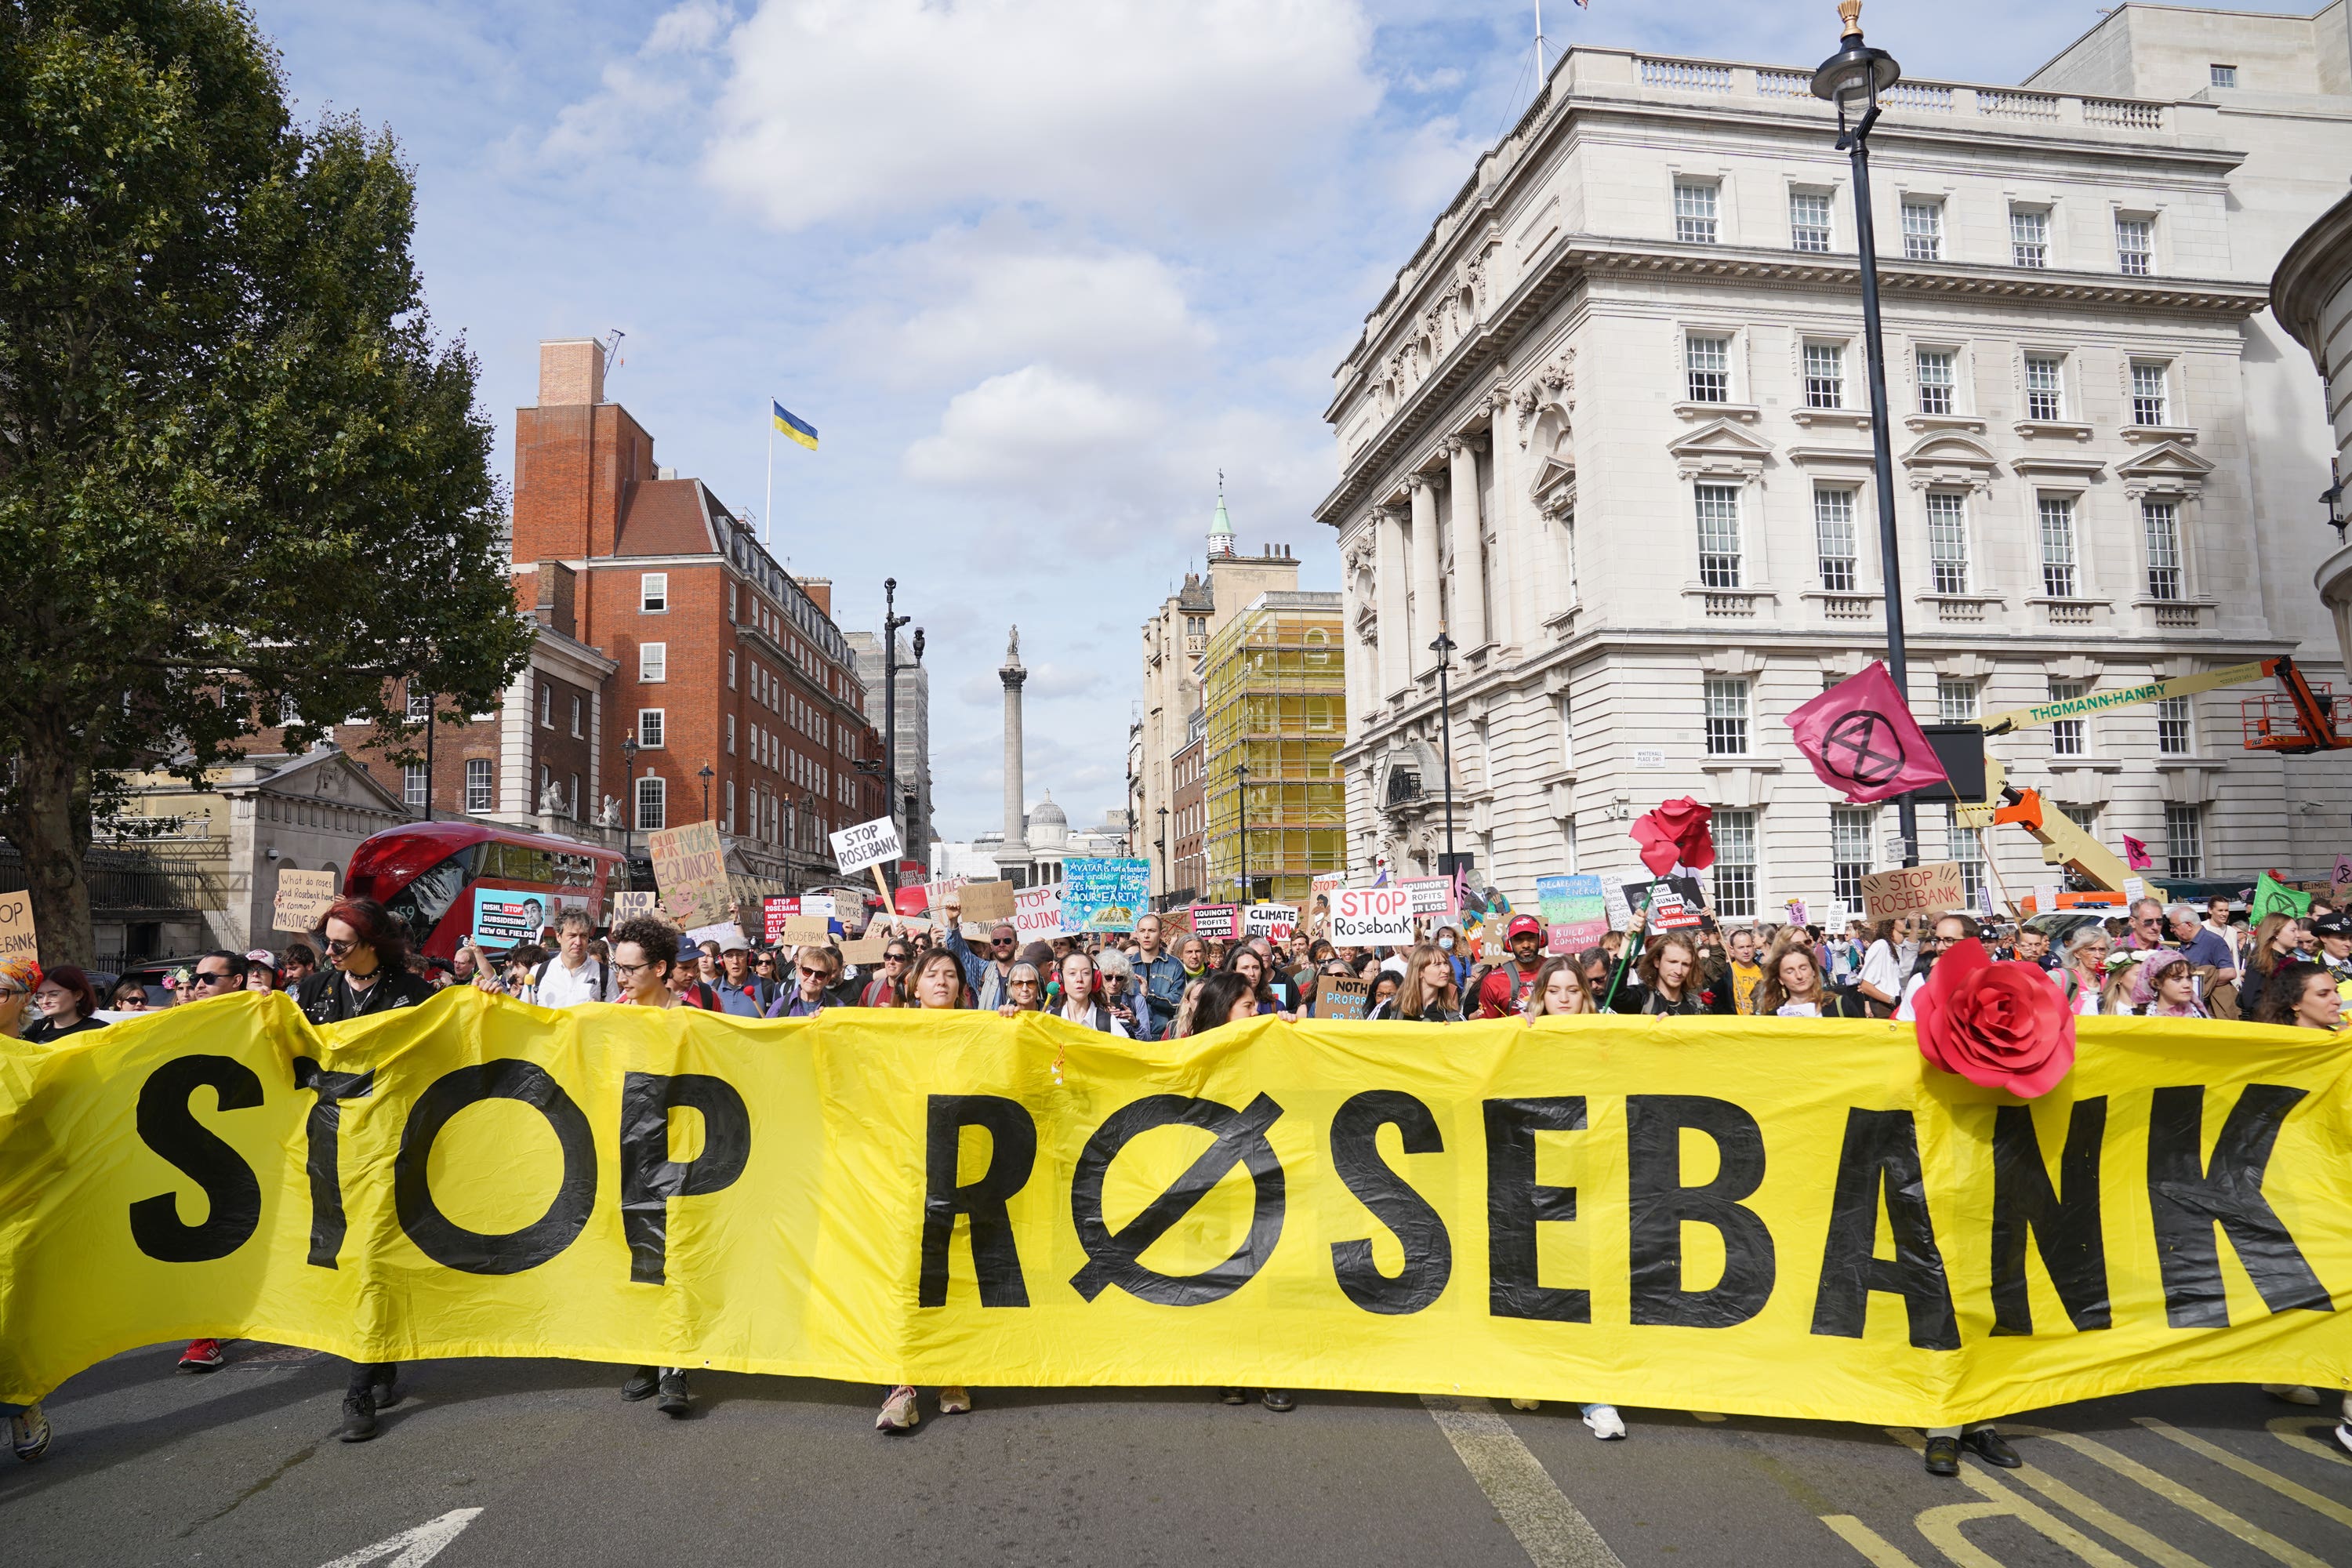 People take part in a protest in central London after the controversial Equinor Rosebank North Sea oil field was given the go-ahead (Lucy North/PA)